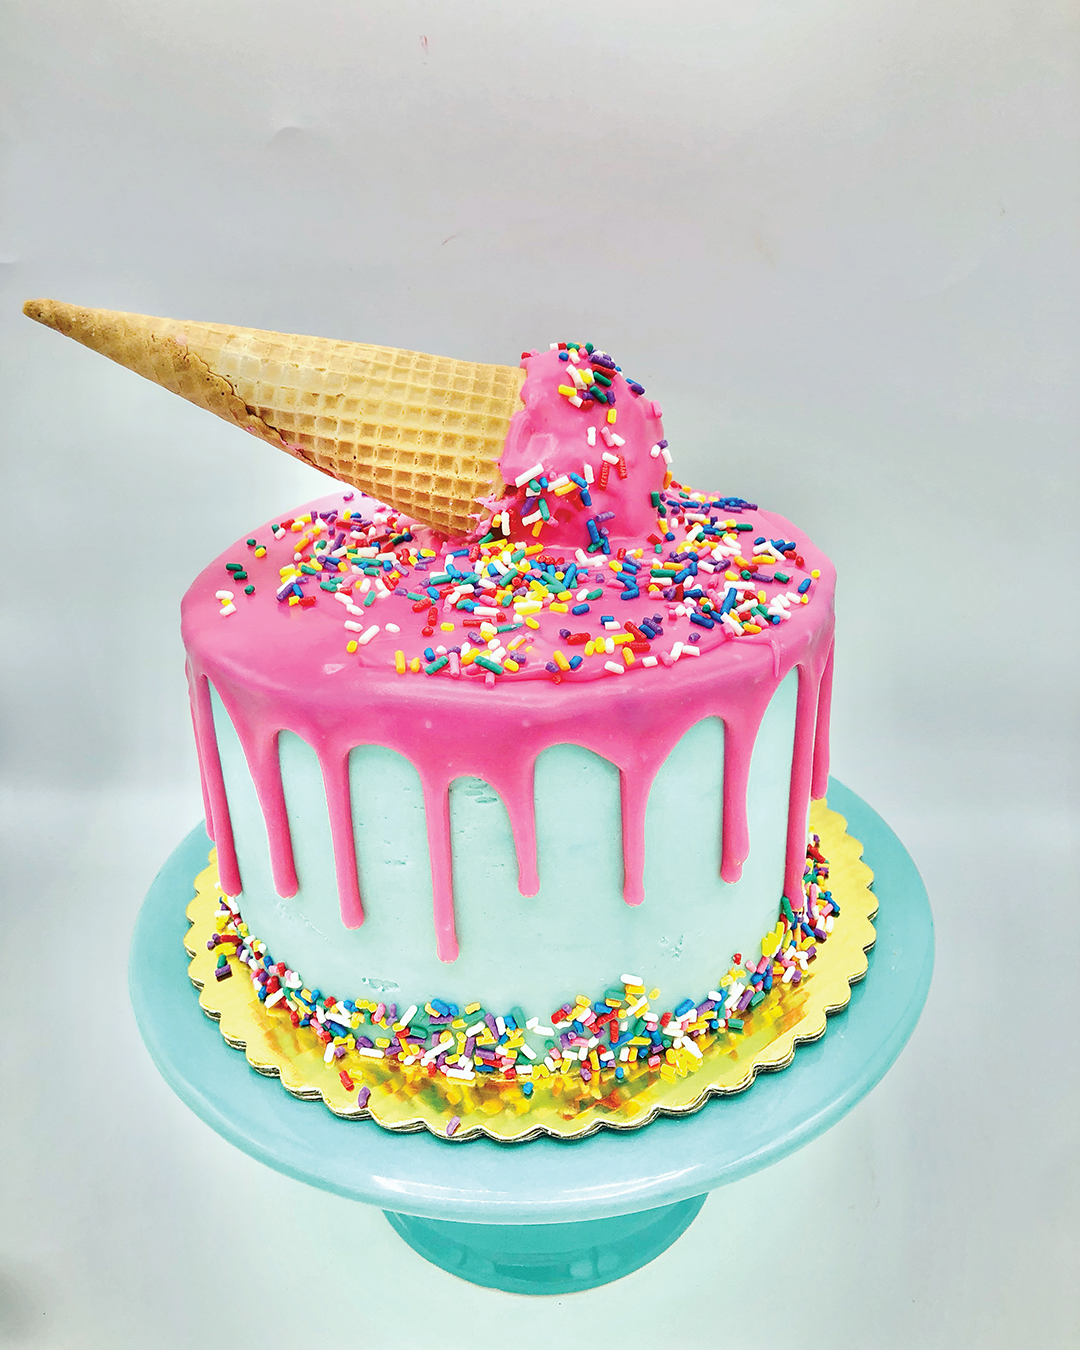 Cake decorated with an ice cream cone made out of frosting.